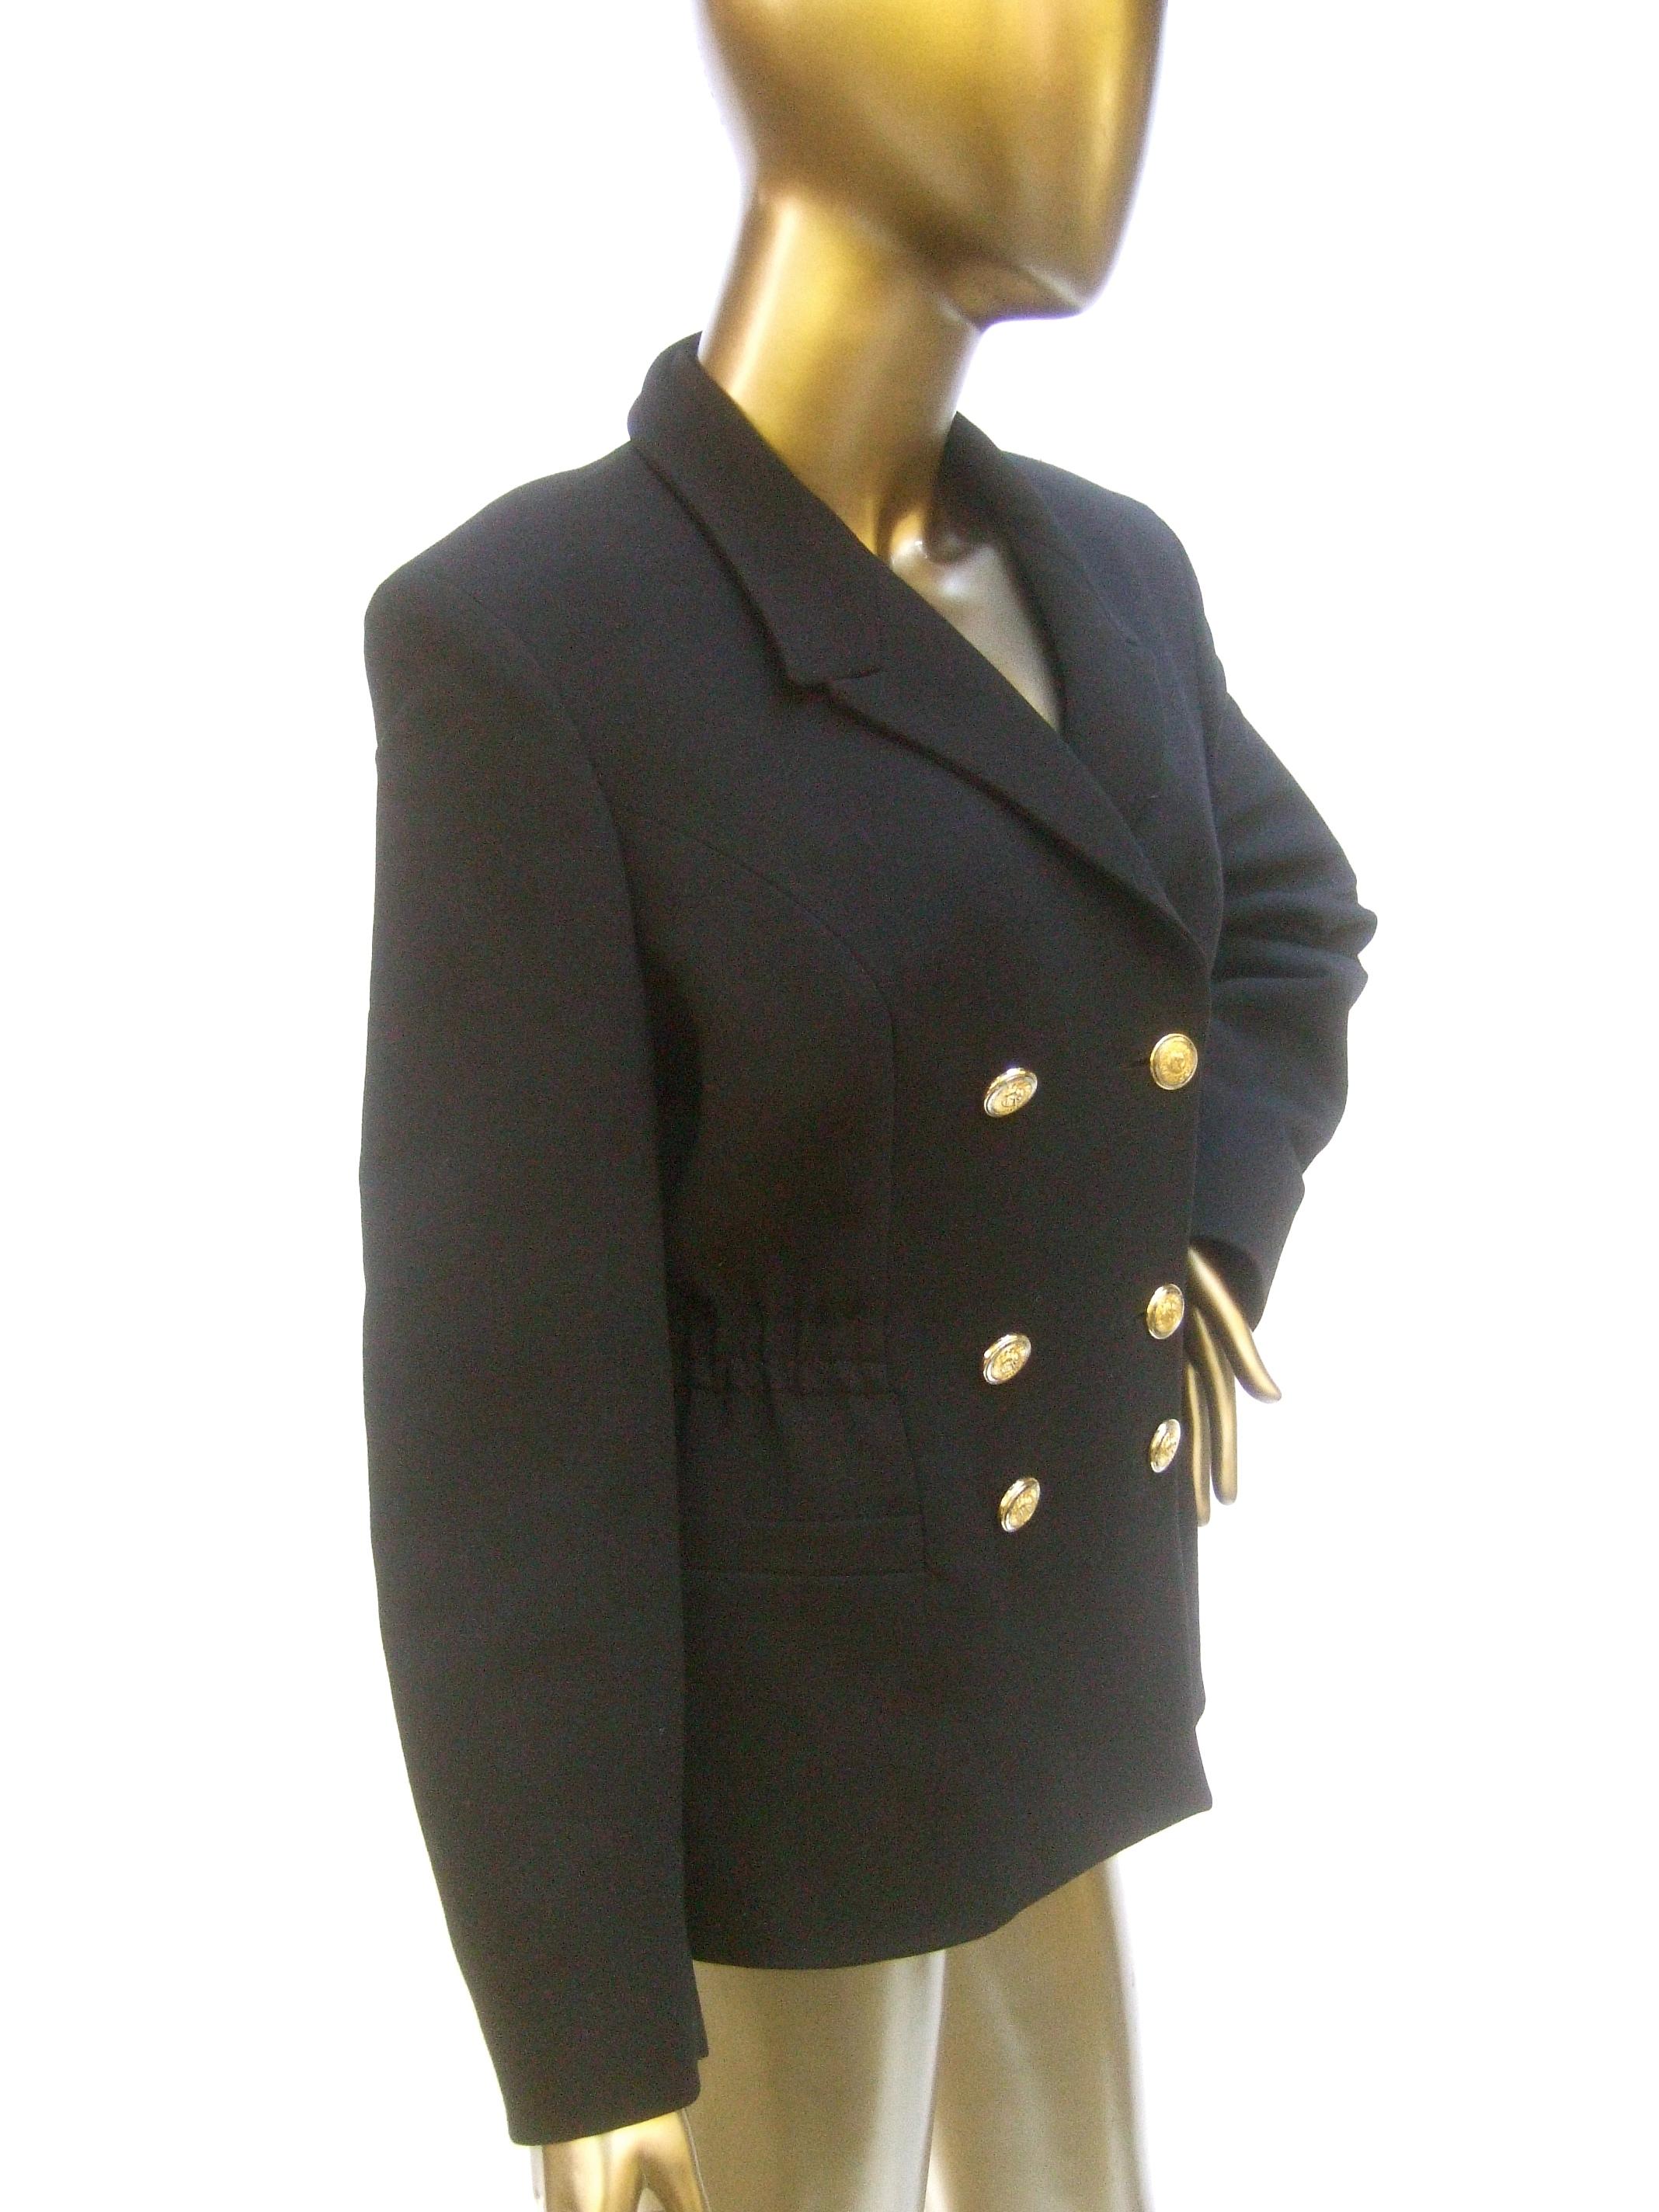 Versace Versus Black Wool Military Style Jacket Circa 1990s For Sale 2